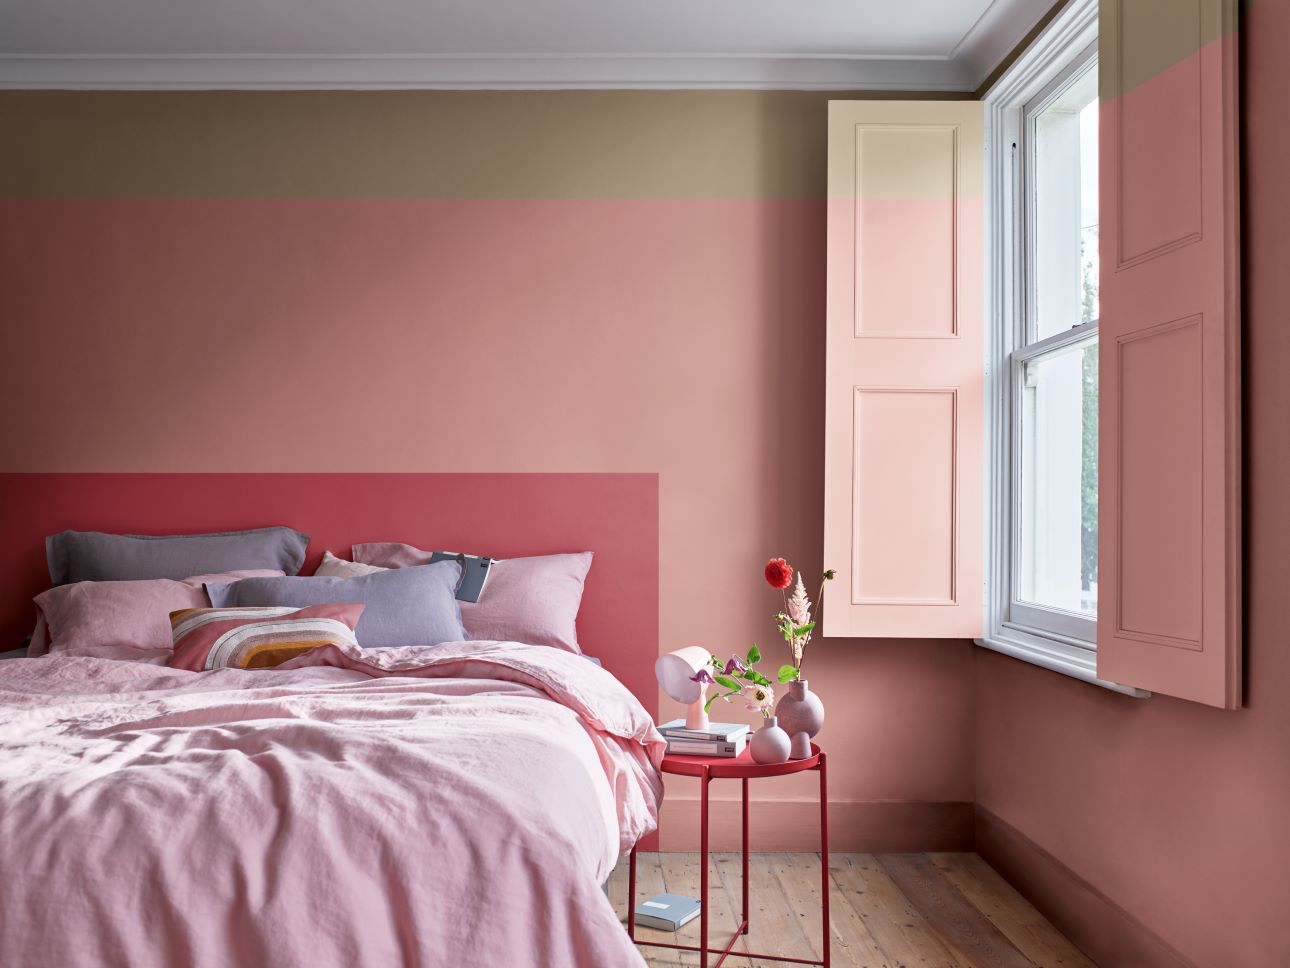 bedroom painted in pink and beige with pink decor and accessories